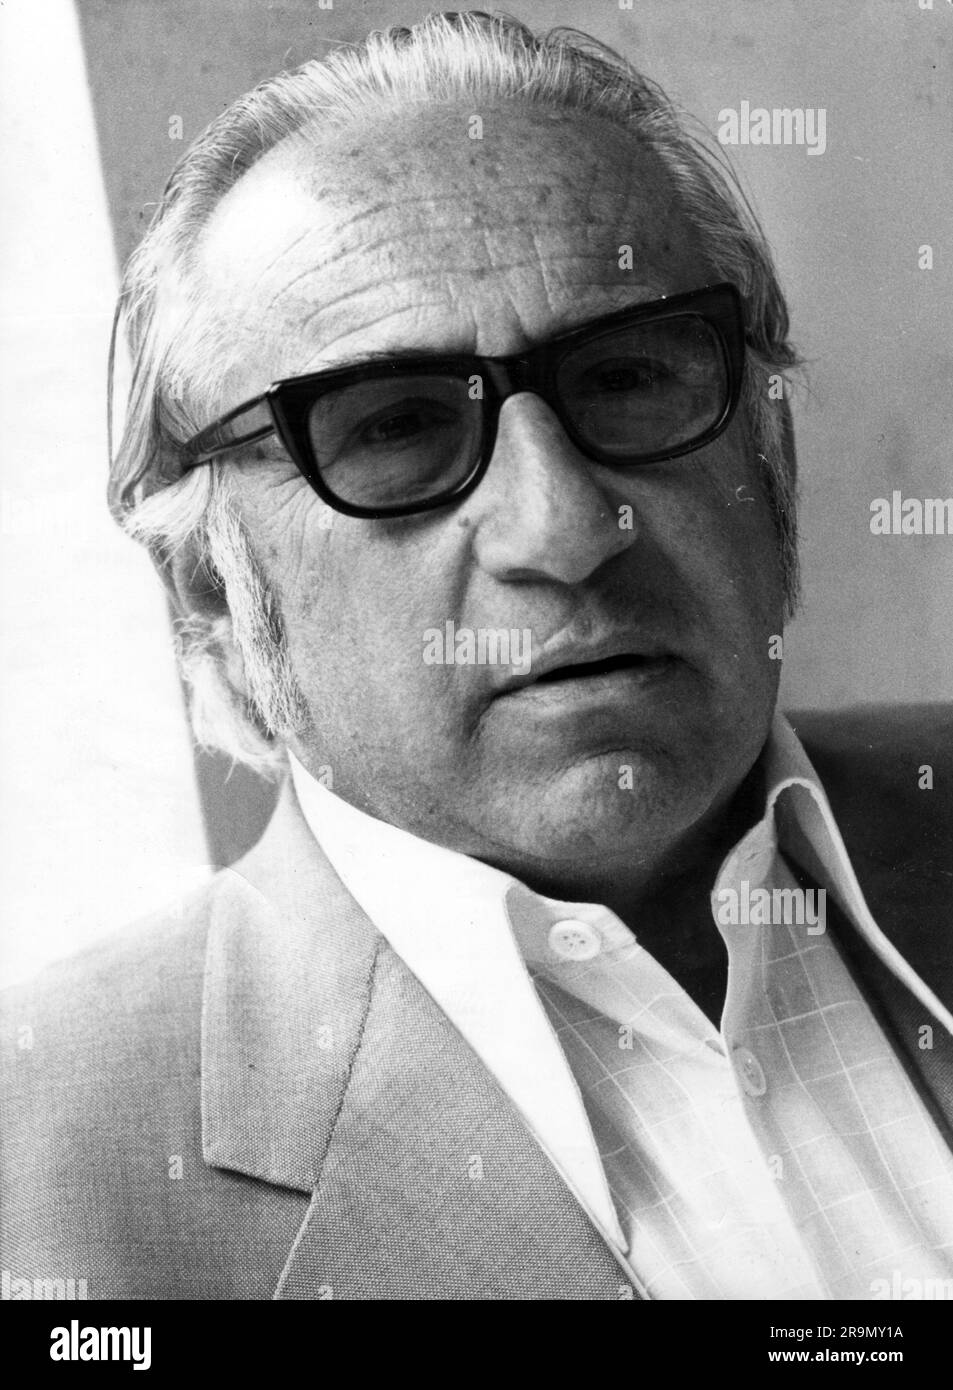 Weigel, Hans, 29.5.1908 - 12.8.1991, Austrian author / writer and theatre critic, circa 1974, ADDITIONAL-RIGHTS-CLEARANCE-INFO-NOT-AVAILABLE Stock Photo